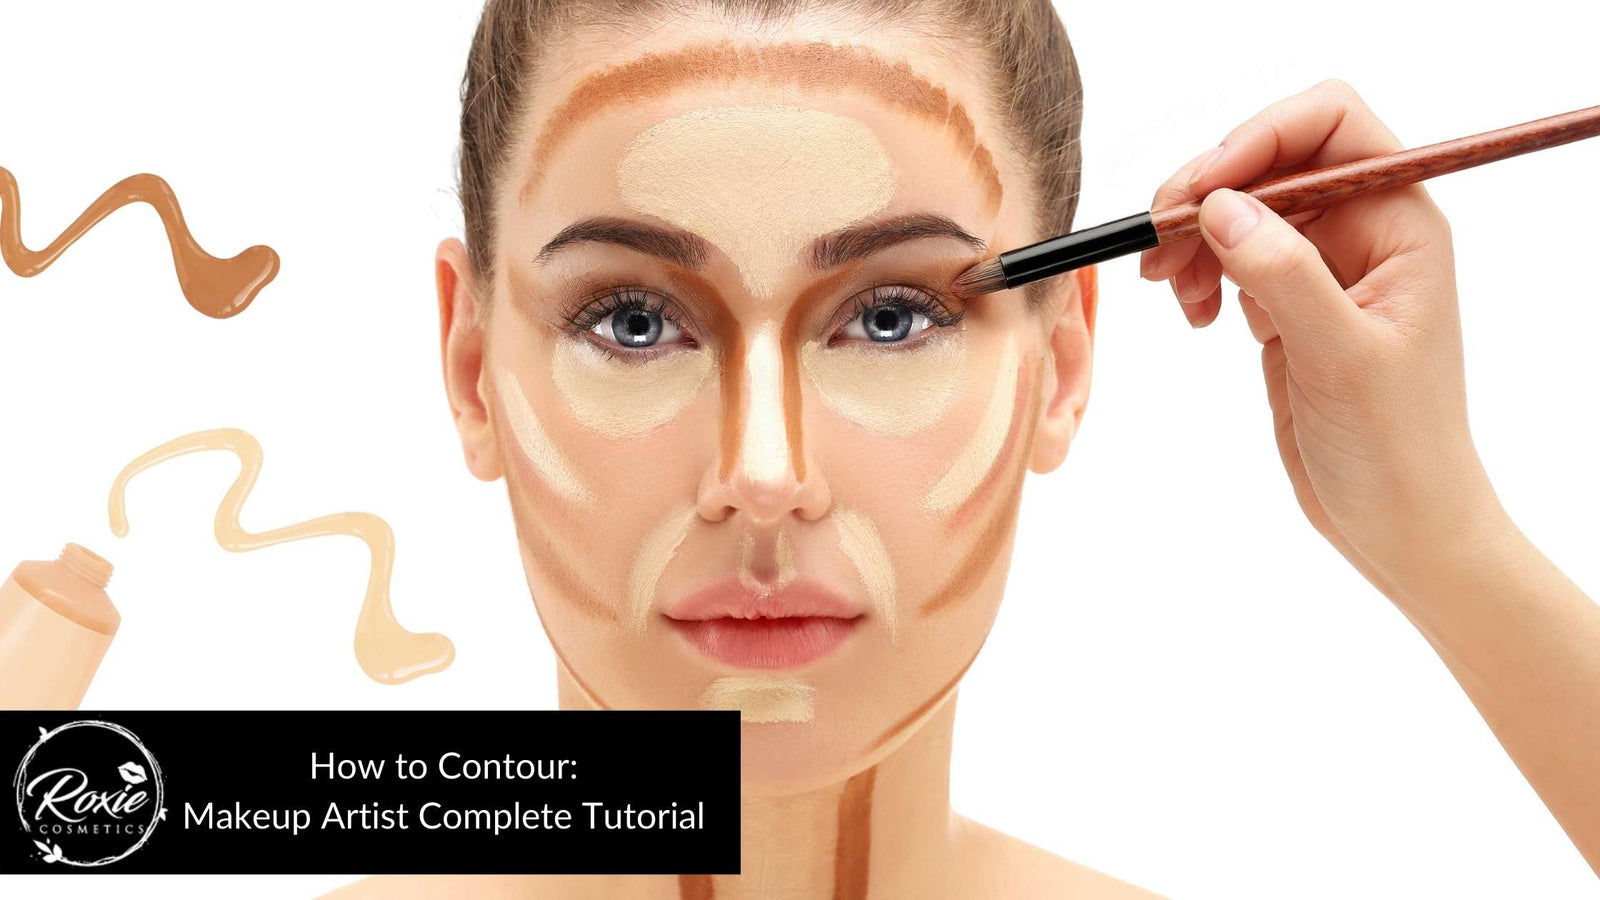 The way you wear makeup is everything! Contour placement is